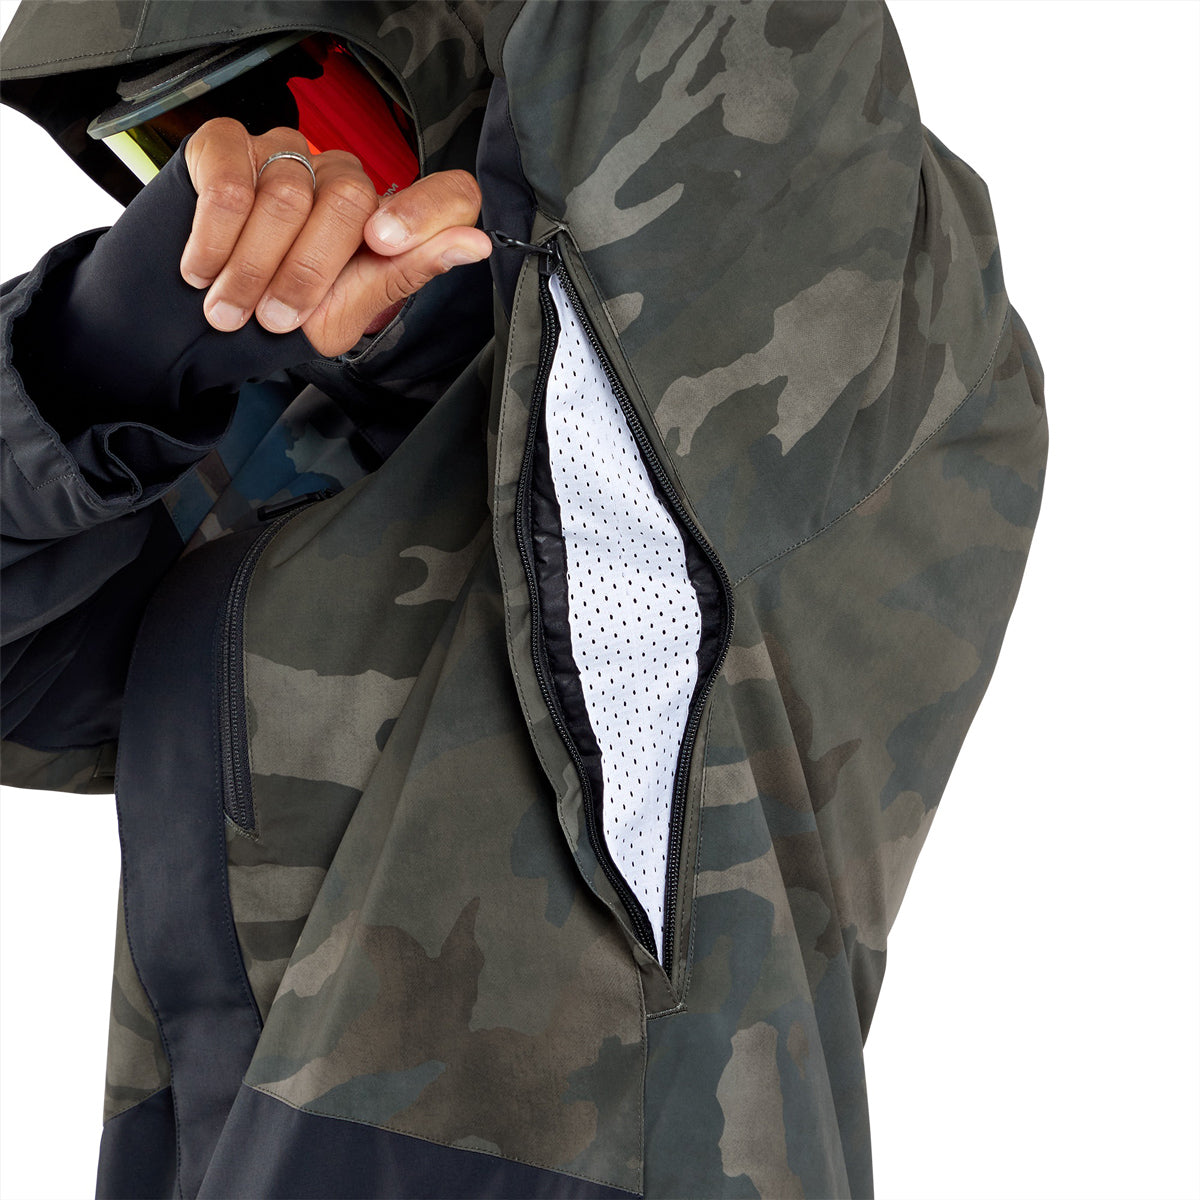 Volcom Vcolp Insulated 2024 Snowboard Jacket - Cloudwash Camo image 4